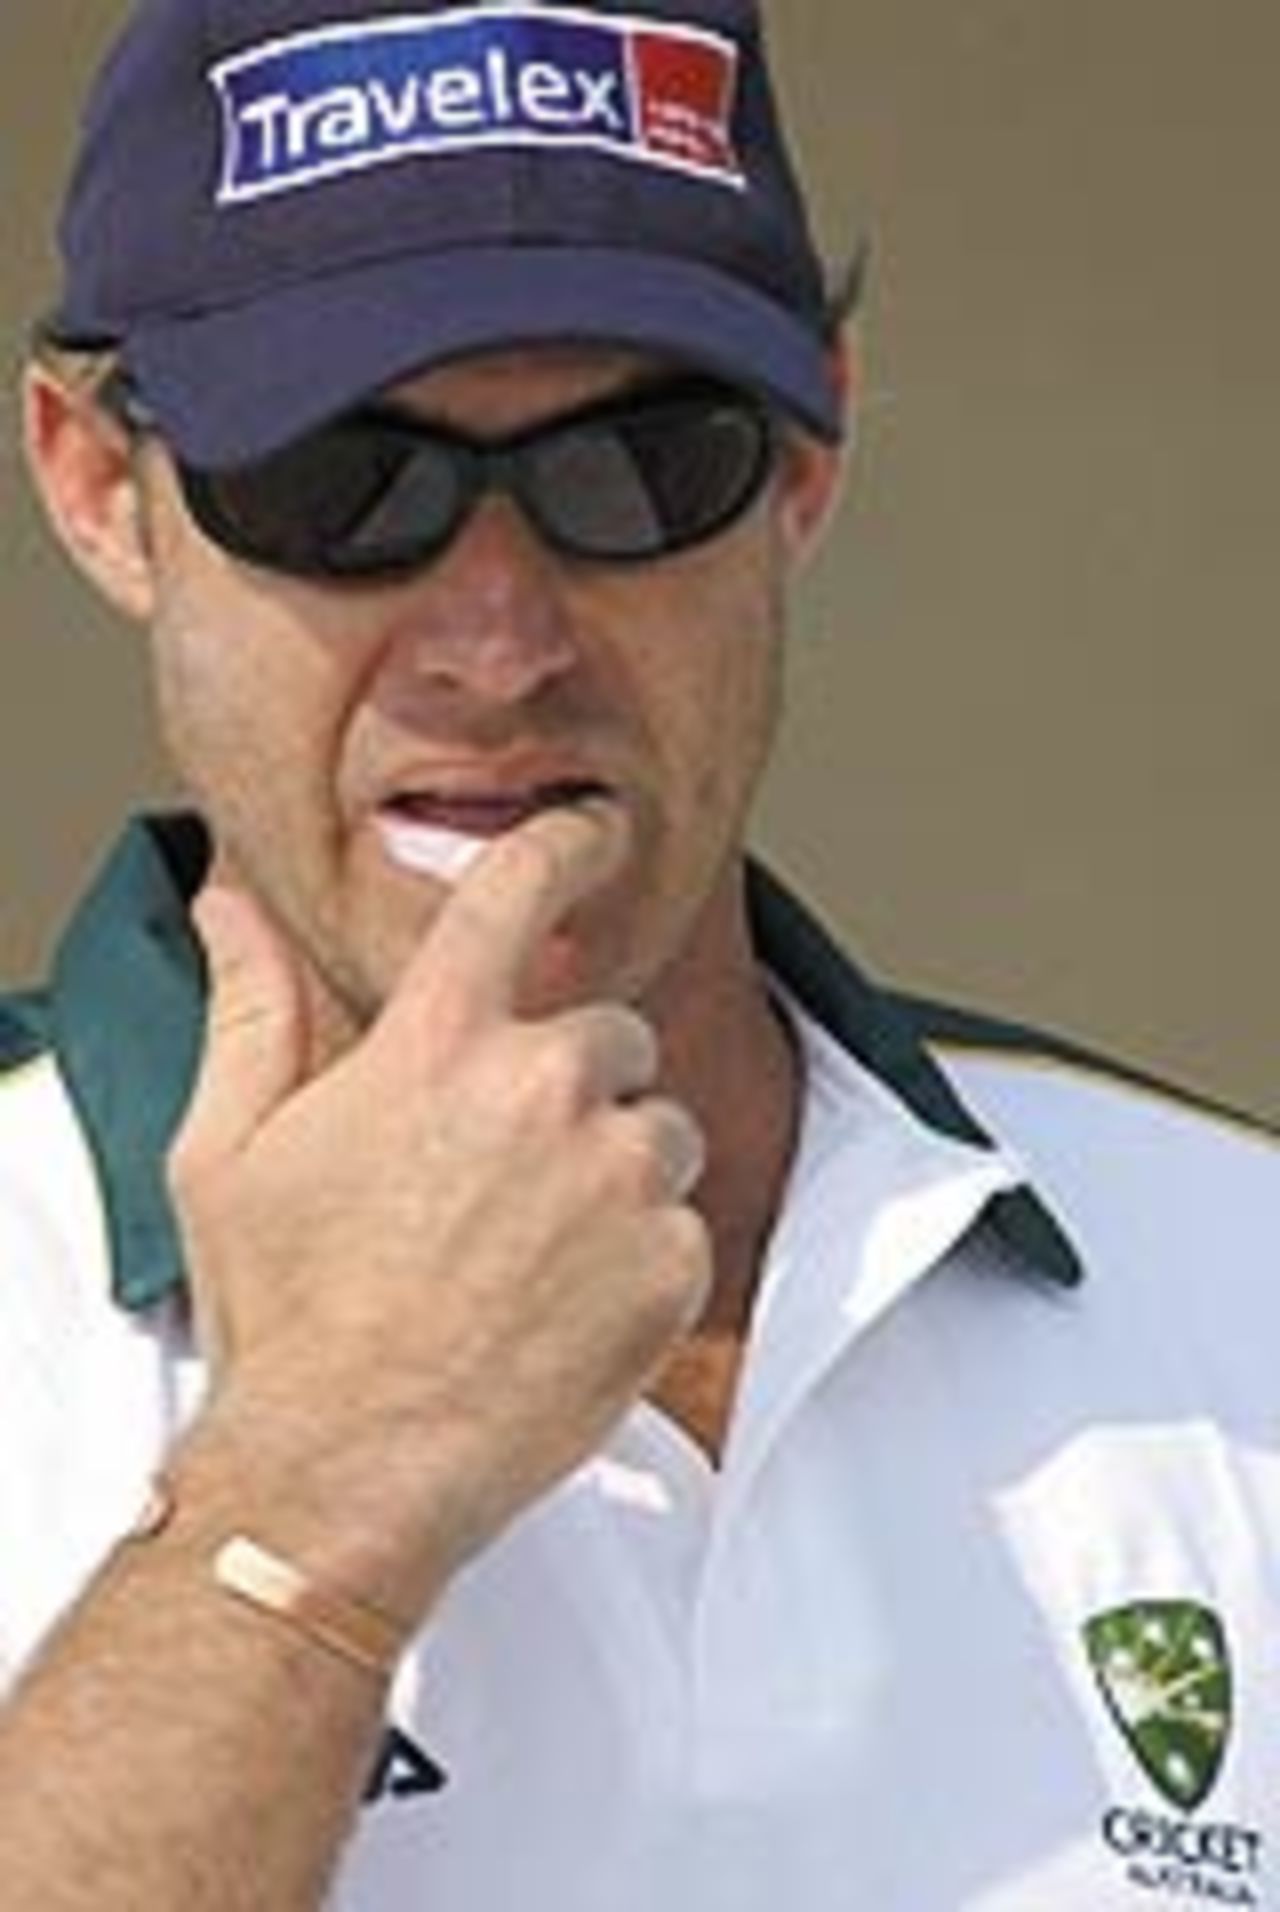 Australian national cricket team player Matthew Hayden applies lip balm to his lips during a practice session in New Delhi, 24 October 2003